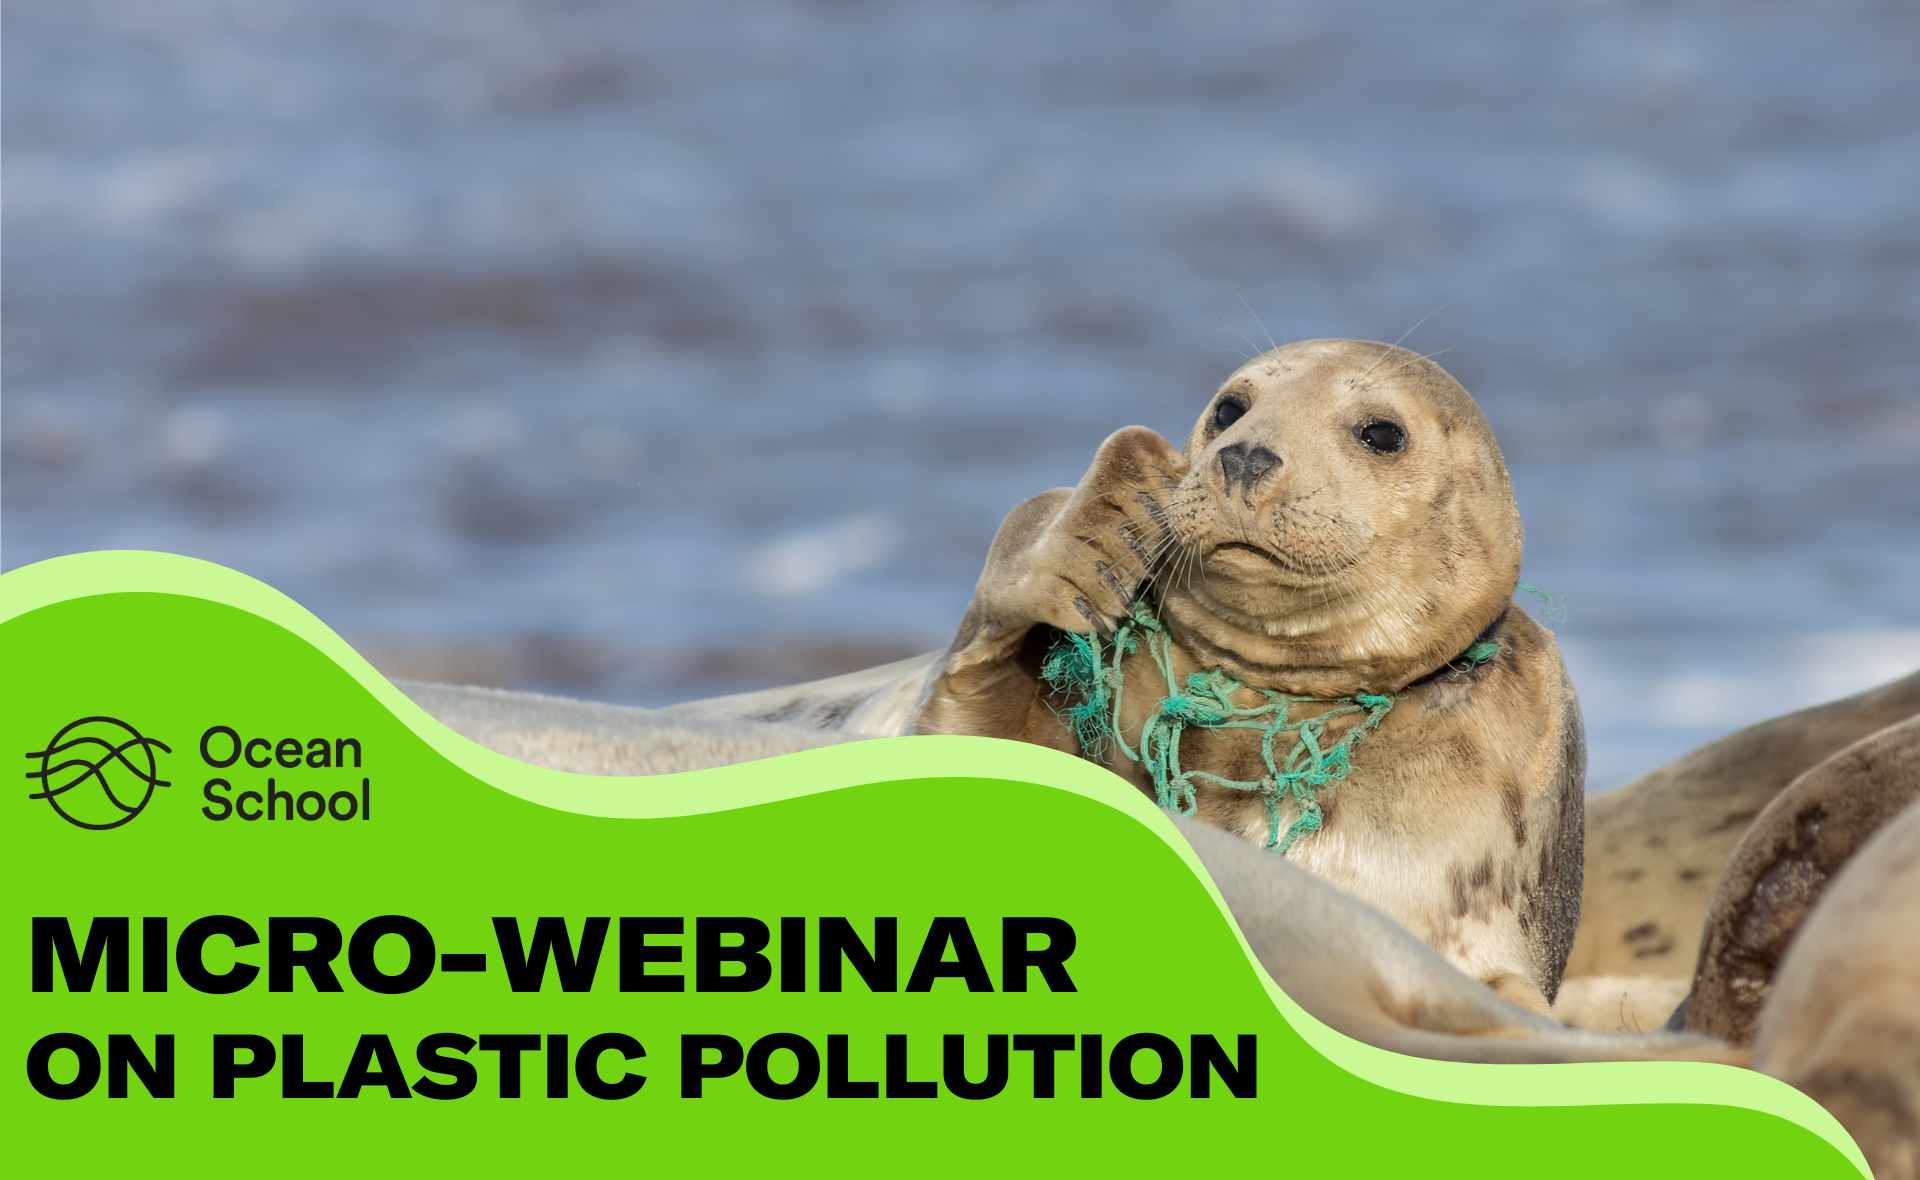 Promotional poster for the micro-webinars on plastic pollution.